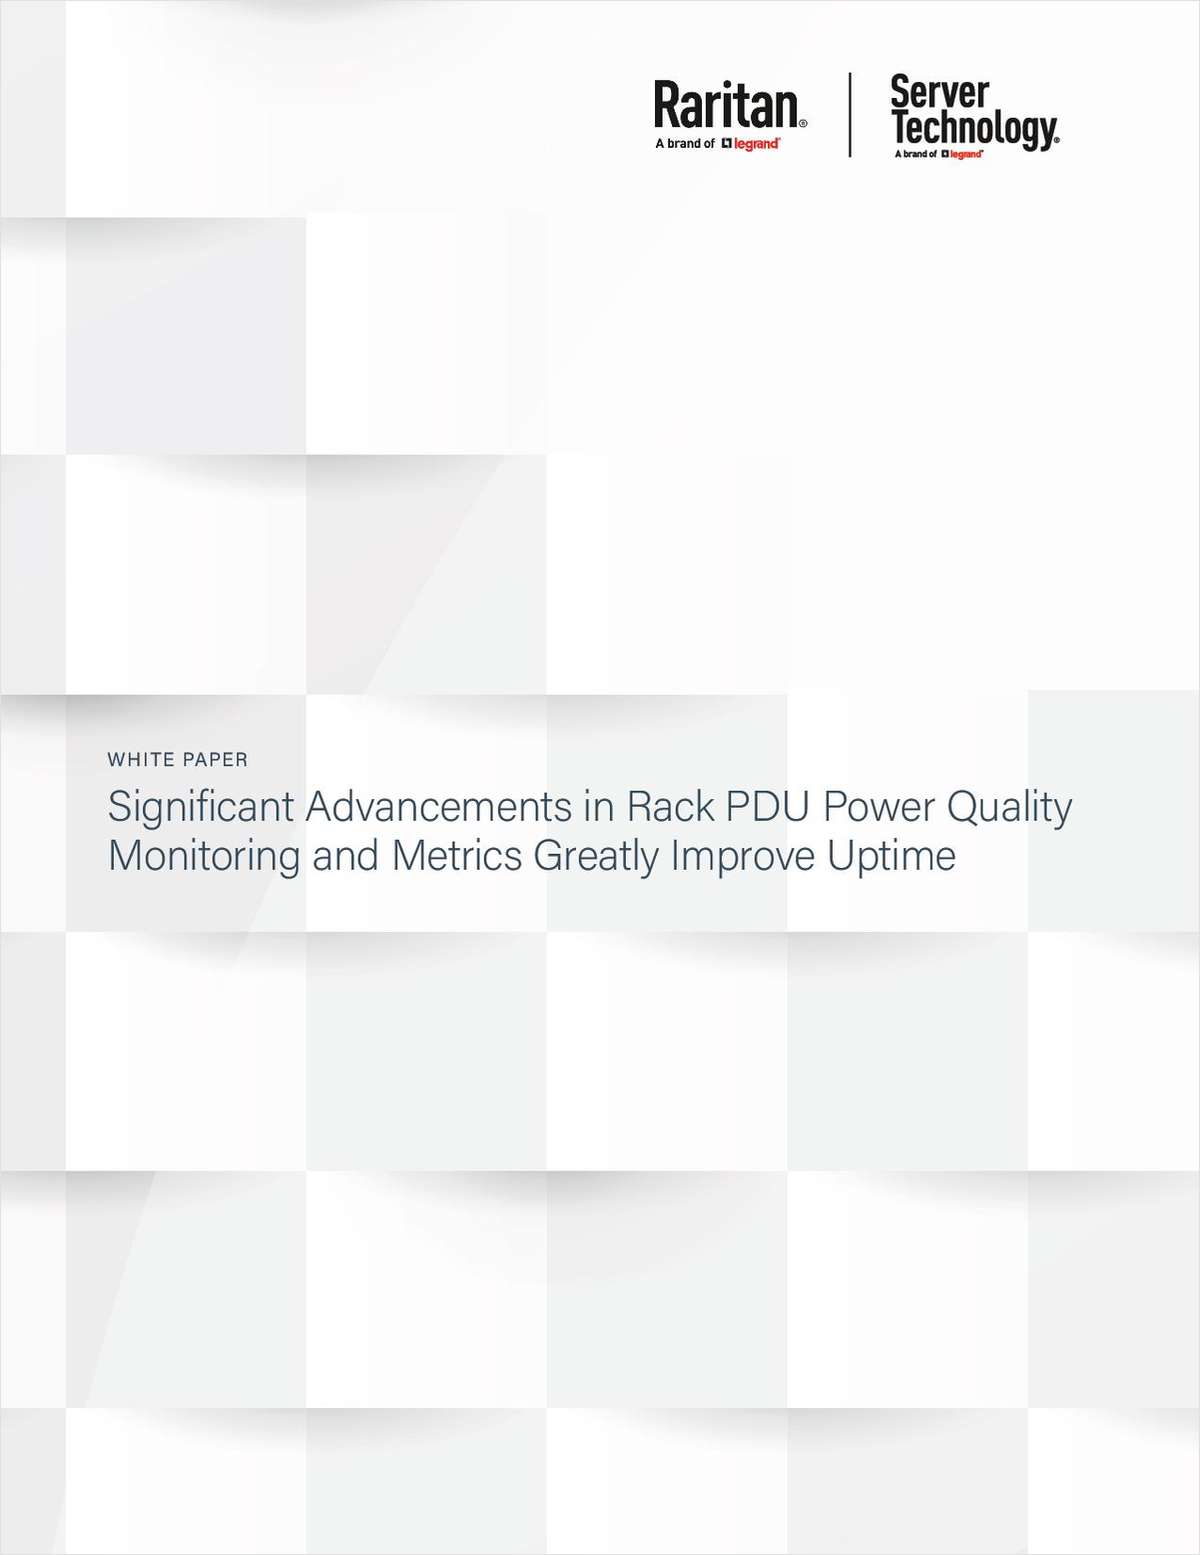 Significant Advancements in Rack PDU Power Quality Monitoring and Metrics Greatly Improve Uptime